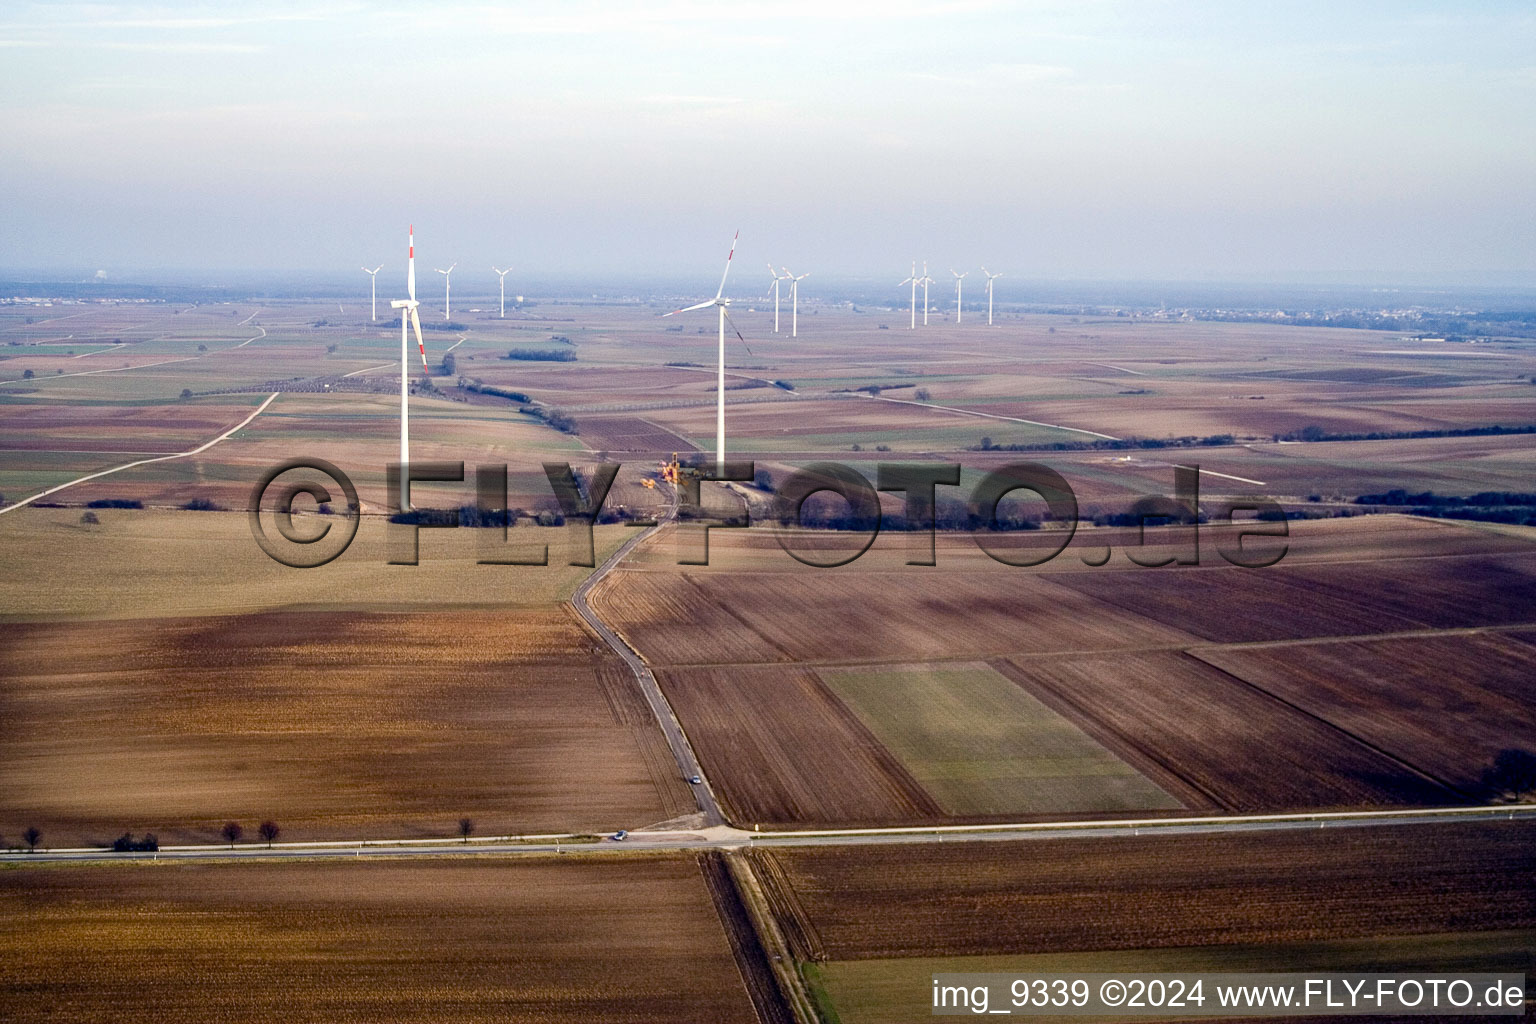 Aerial photograpy of Wind turbines in Offenbach an der Queich in the state Rhineland-Palatinate, Germany